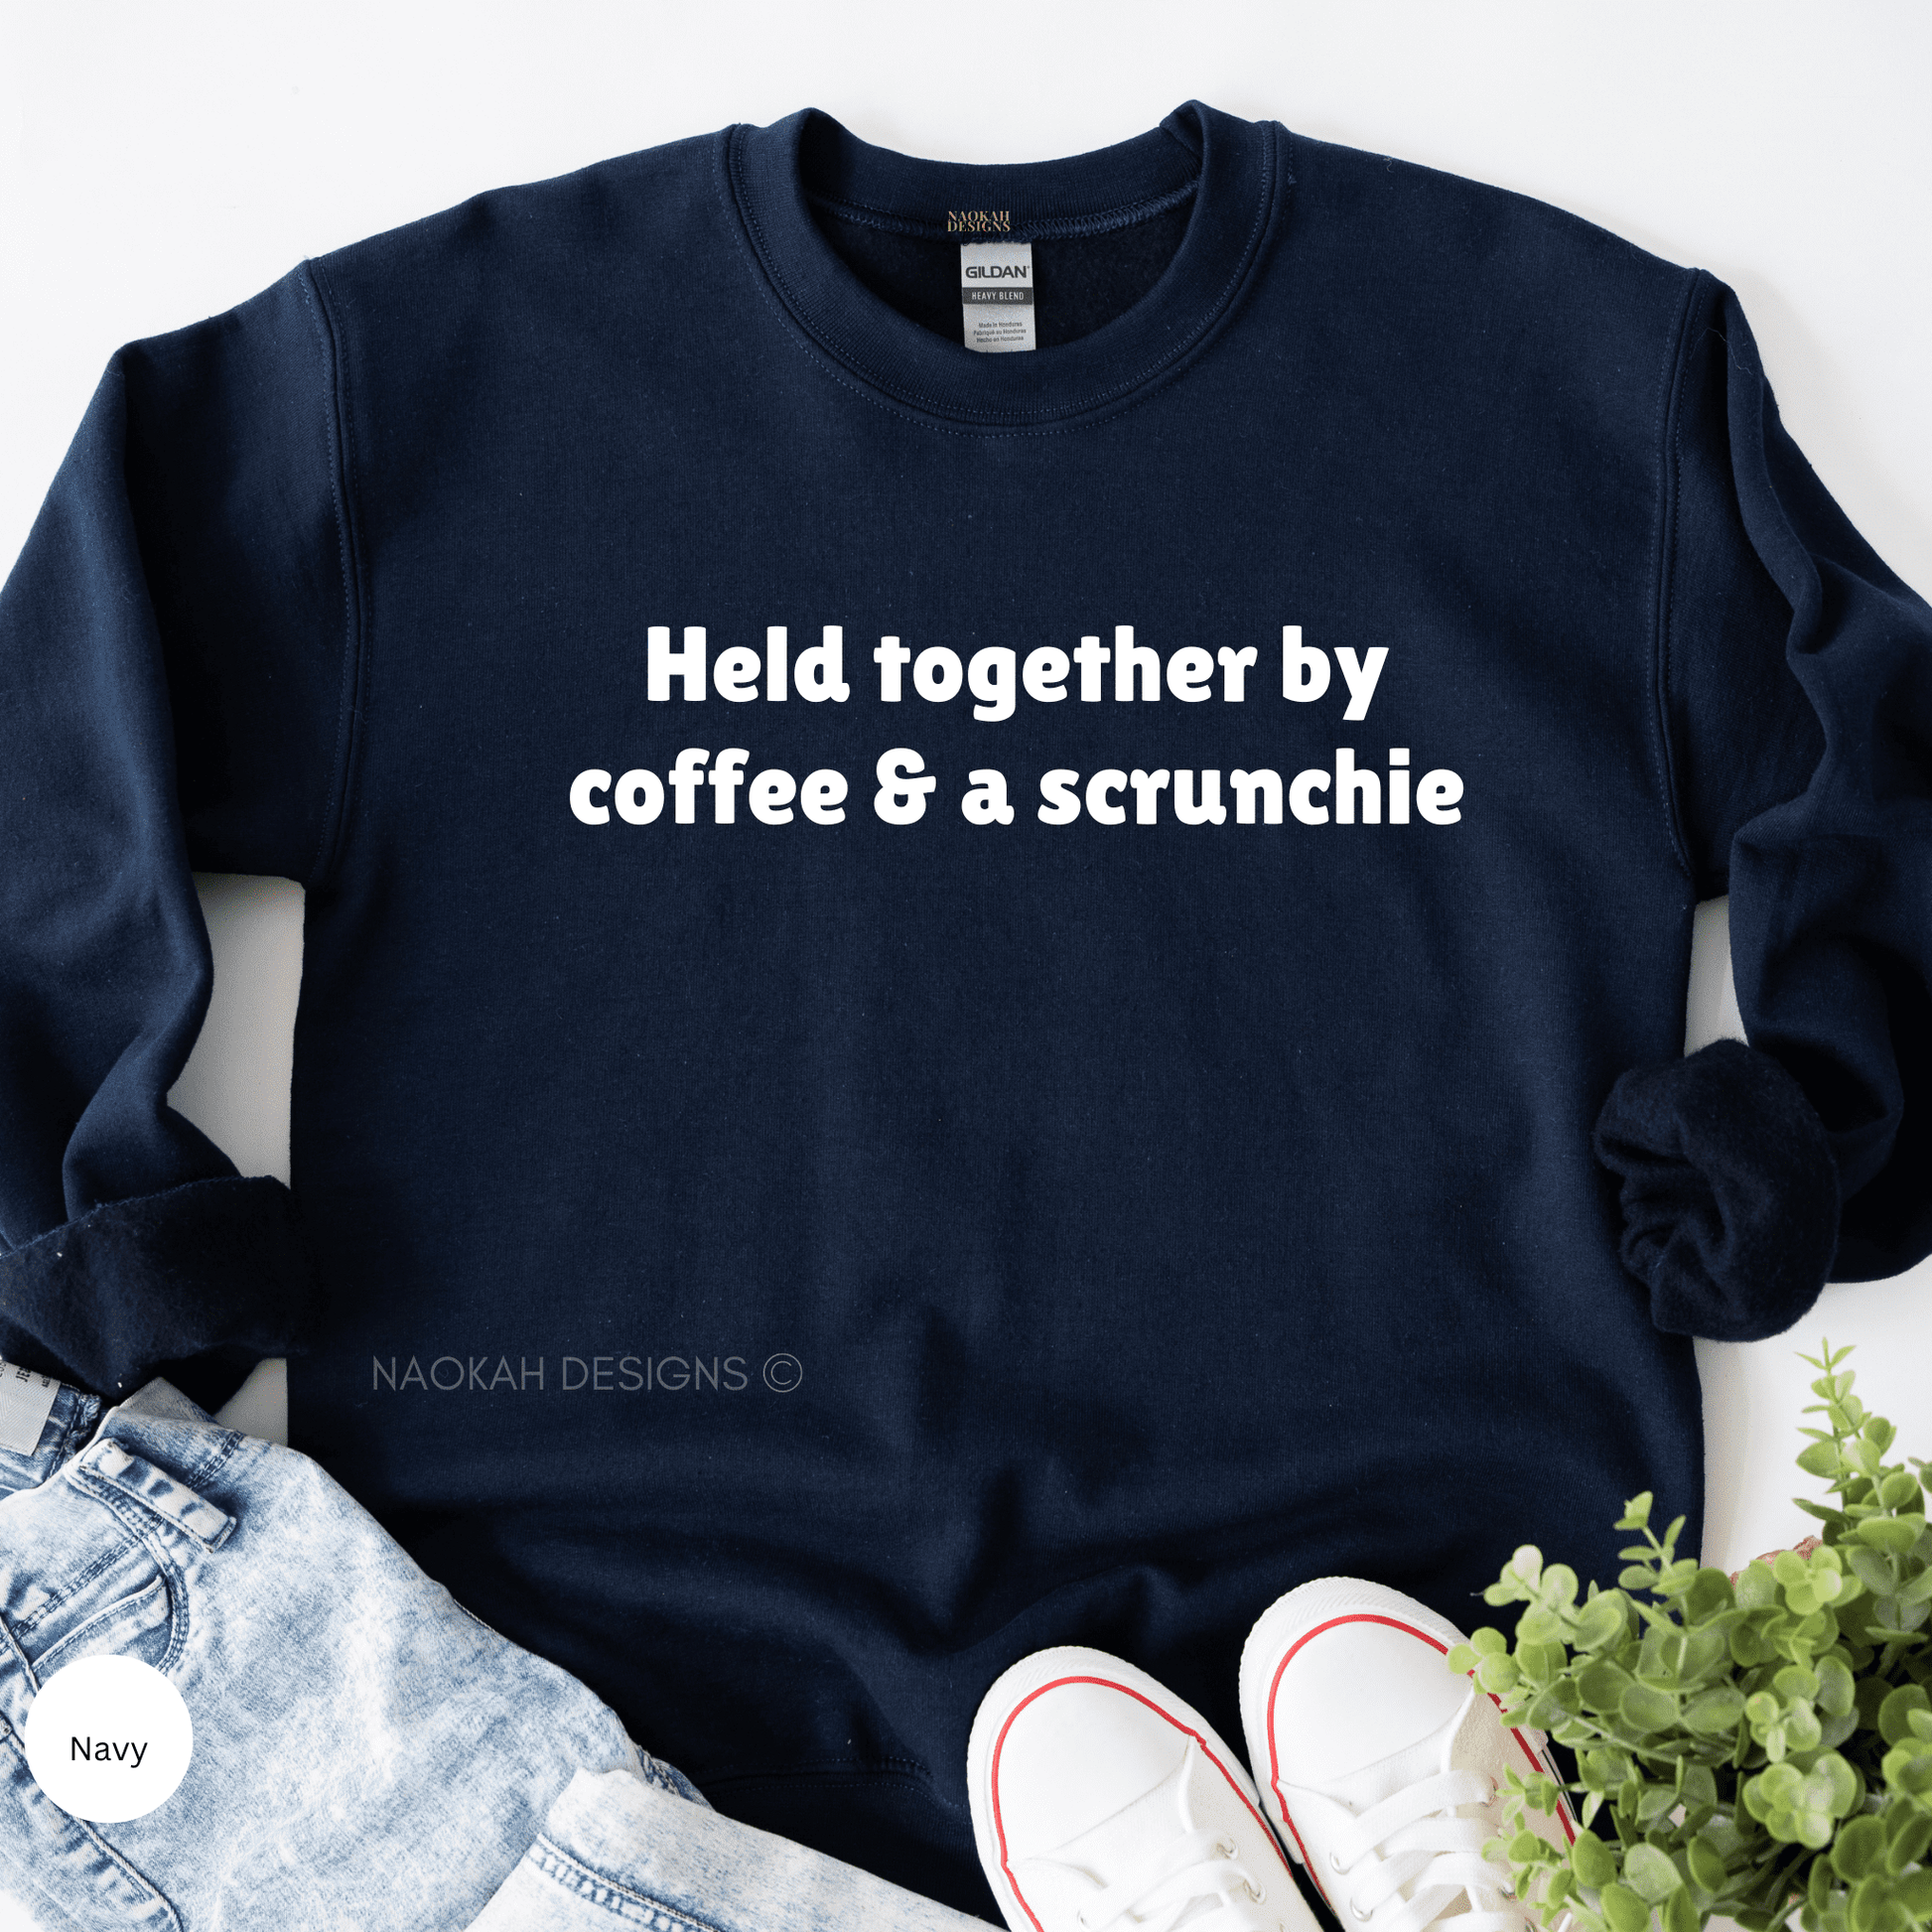 Held Together By Coffee and a Scrunchie Sweater, Coffee Shirt, Summer Tee, Coffee Lover Shirt, Barista Shirt, Iced Coffee Addict Shirt, coffee scrunchie, coffee-colored scrunchie, coffee-colored hair tie, coffee-colored elastic hair tie, coffee hair accessory, elastic hair tie with coffee print, scrunchy with coffee color, scrunchies with coffee motif, coffee colored hair scrunchies, coffee hair scrunchie